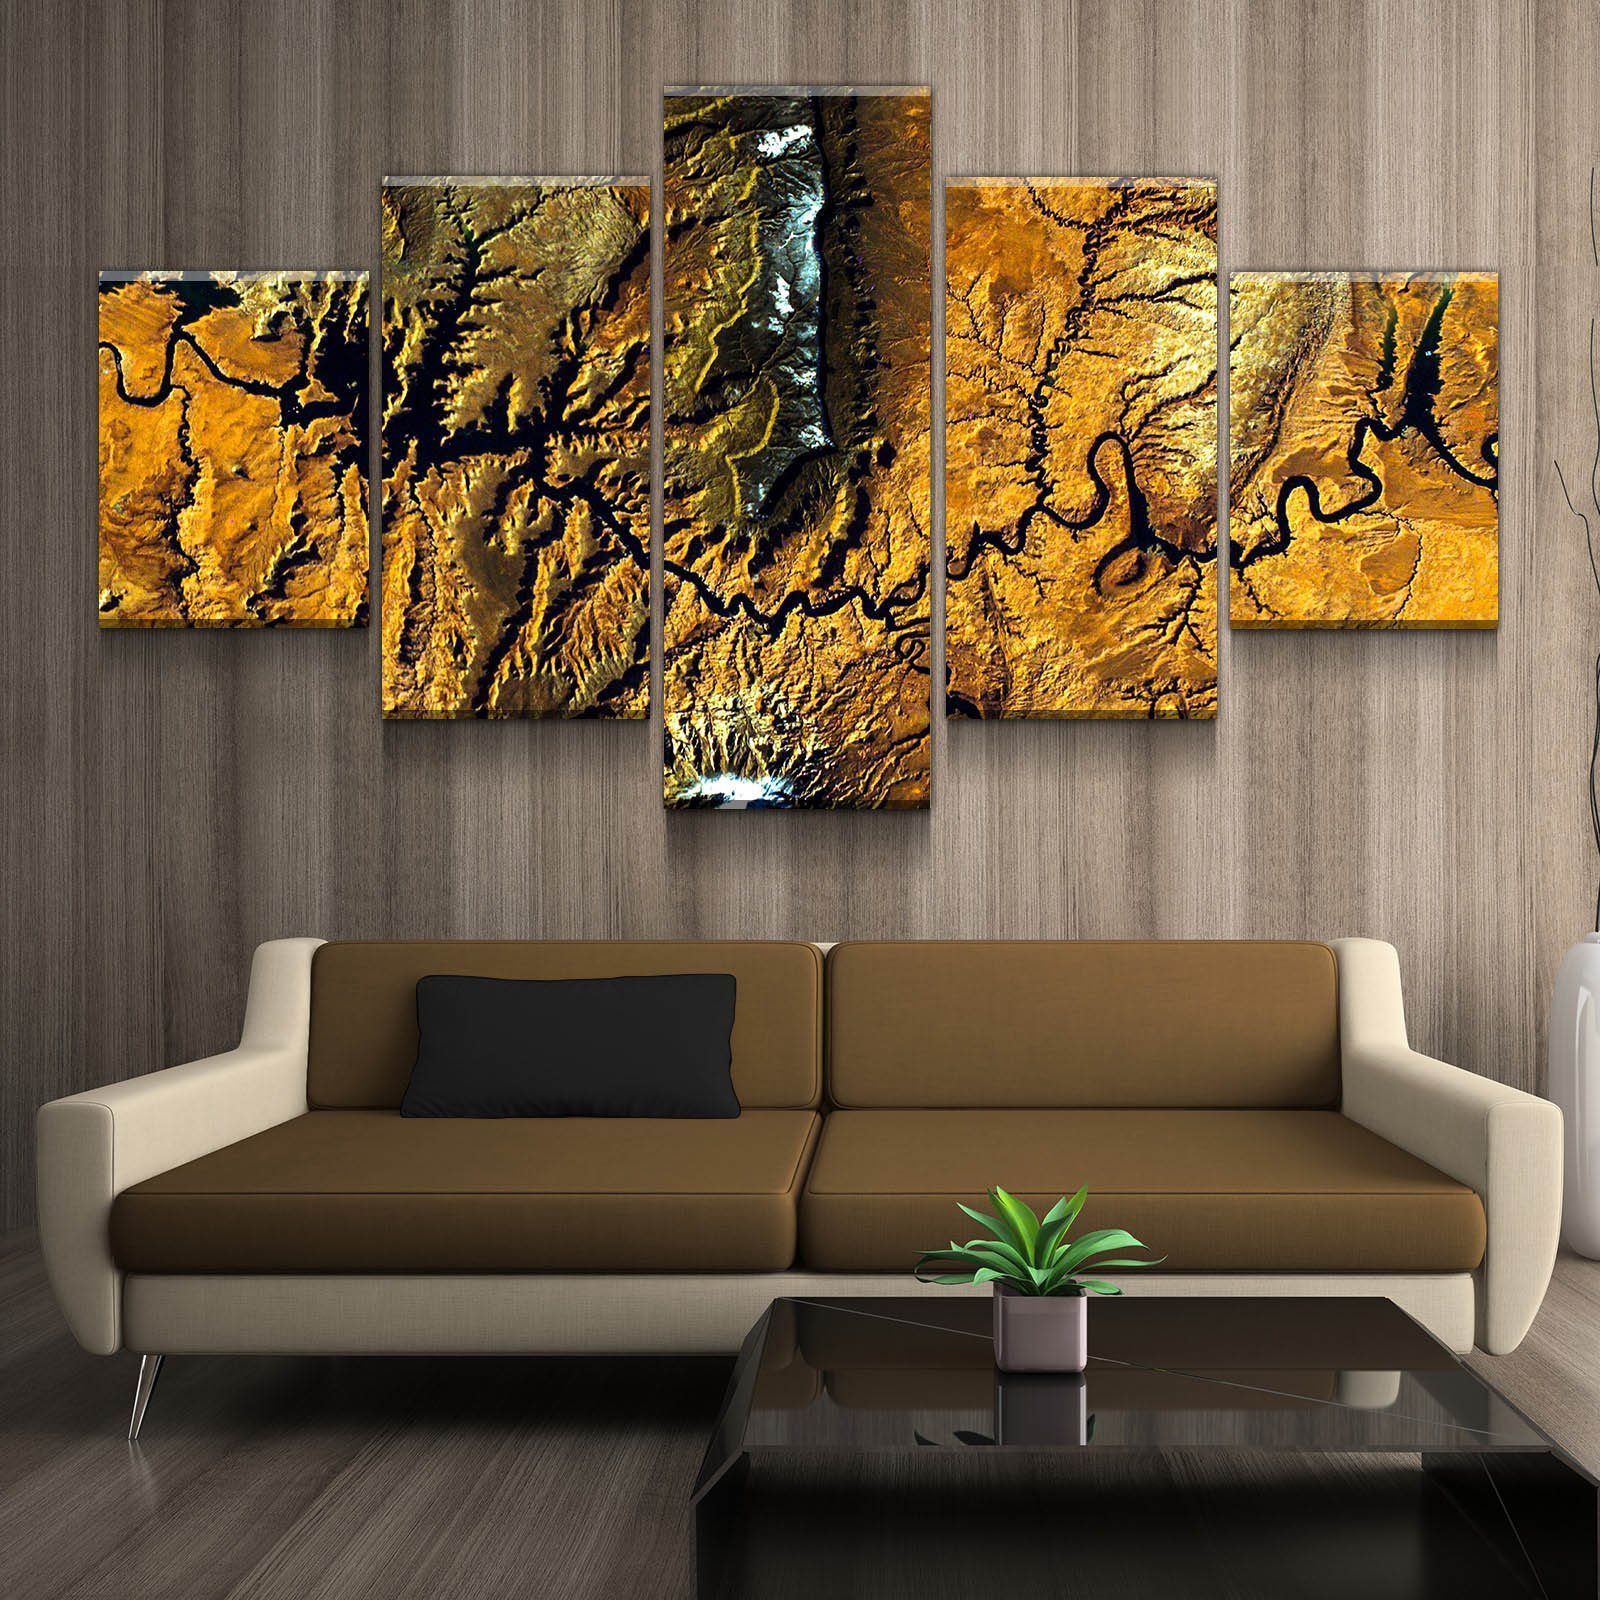 Lake Powell From Space | Caramel Covered Hills | Gallery Quality Canvas Wrap - Houseboat Kings